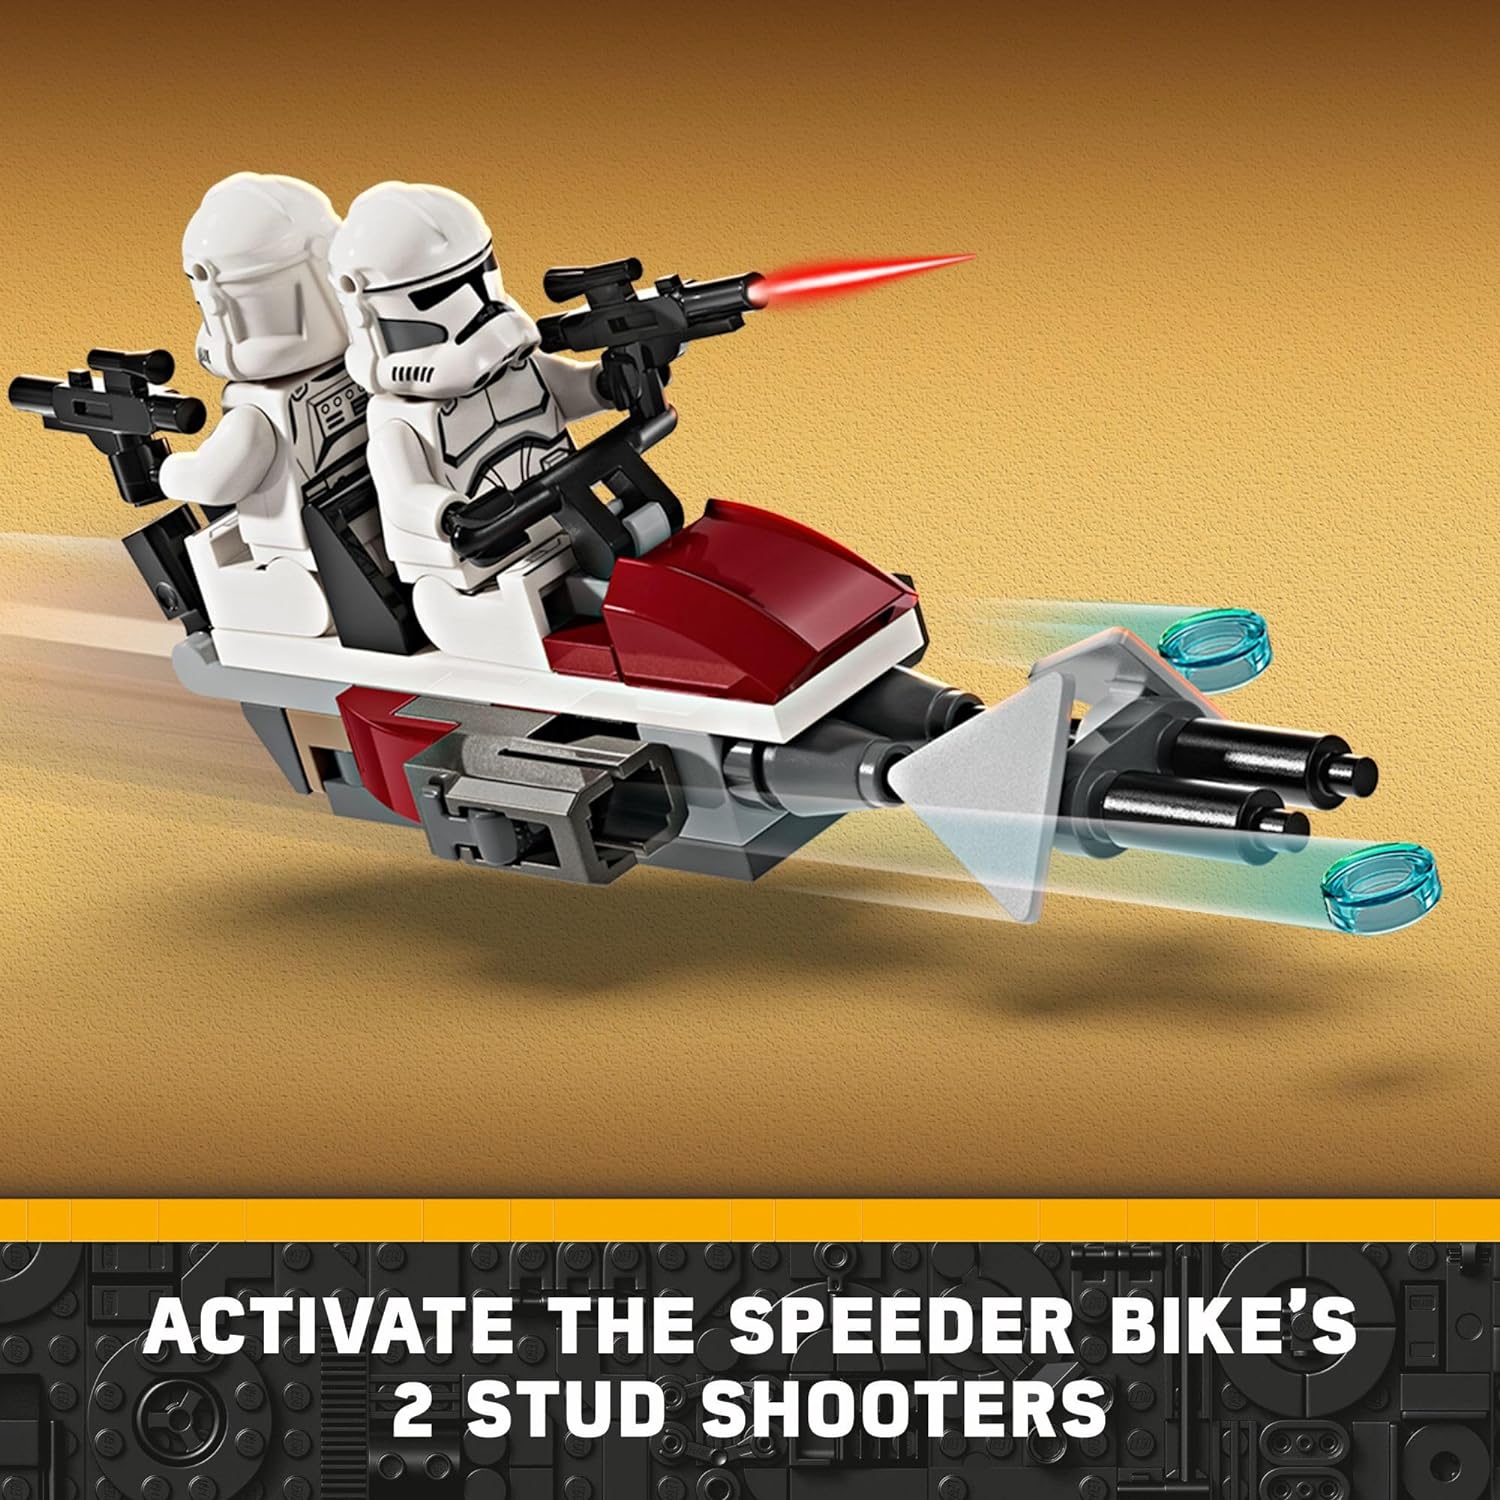 LEGO 75372 Star Wars Clone Trooper & Battle Droid Battle Pack Set for Kids, Buildable Toy Speeder Bike Vehicle, Tri-Droid and Defensive Post.